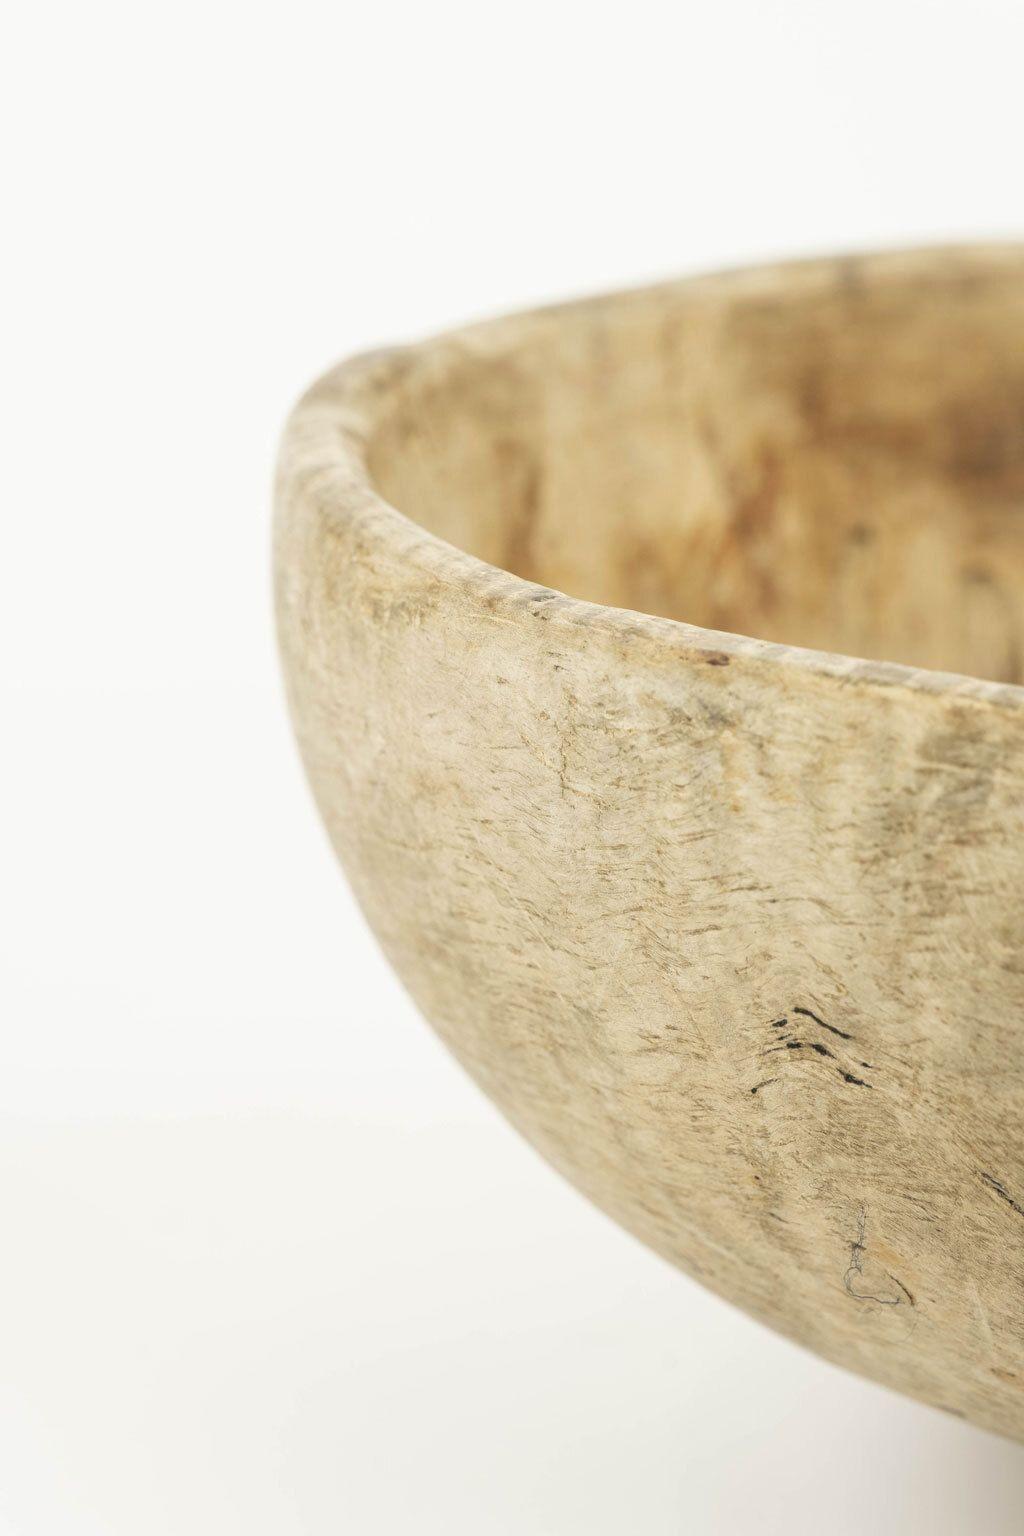 Hand-Carved Swedish Naturally-Bleached Root Wood Bowl